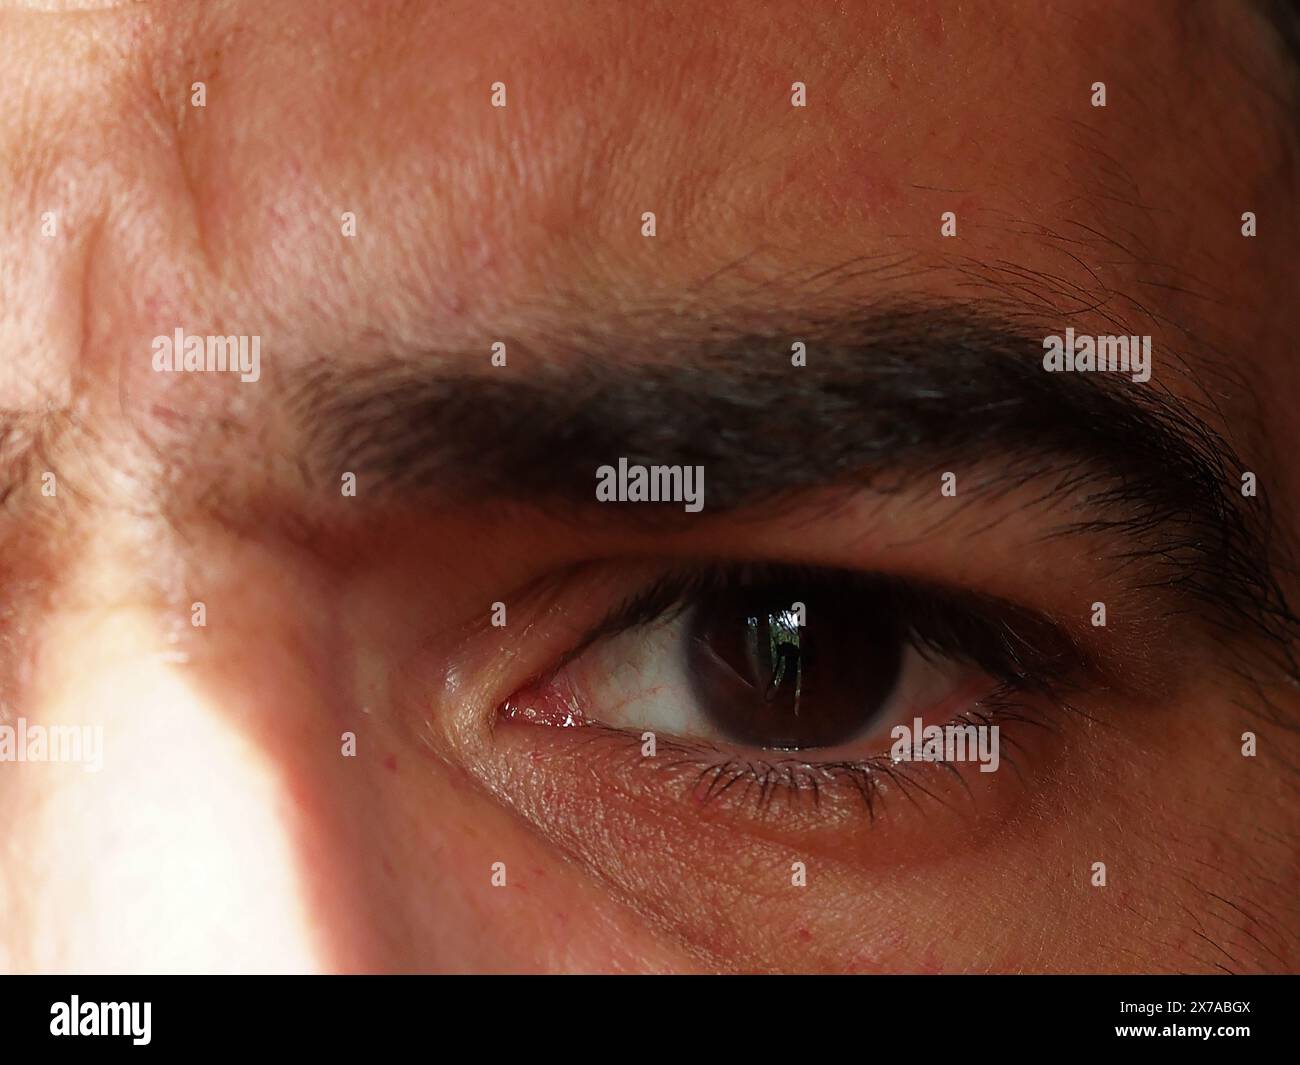 Close-up eye of a dark-skinned man with wide thick eyebrows and long eyelashes.OLYMPUS DIGITAL CAMERA Stock Photo